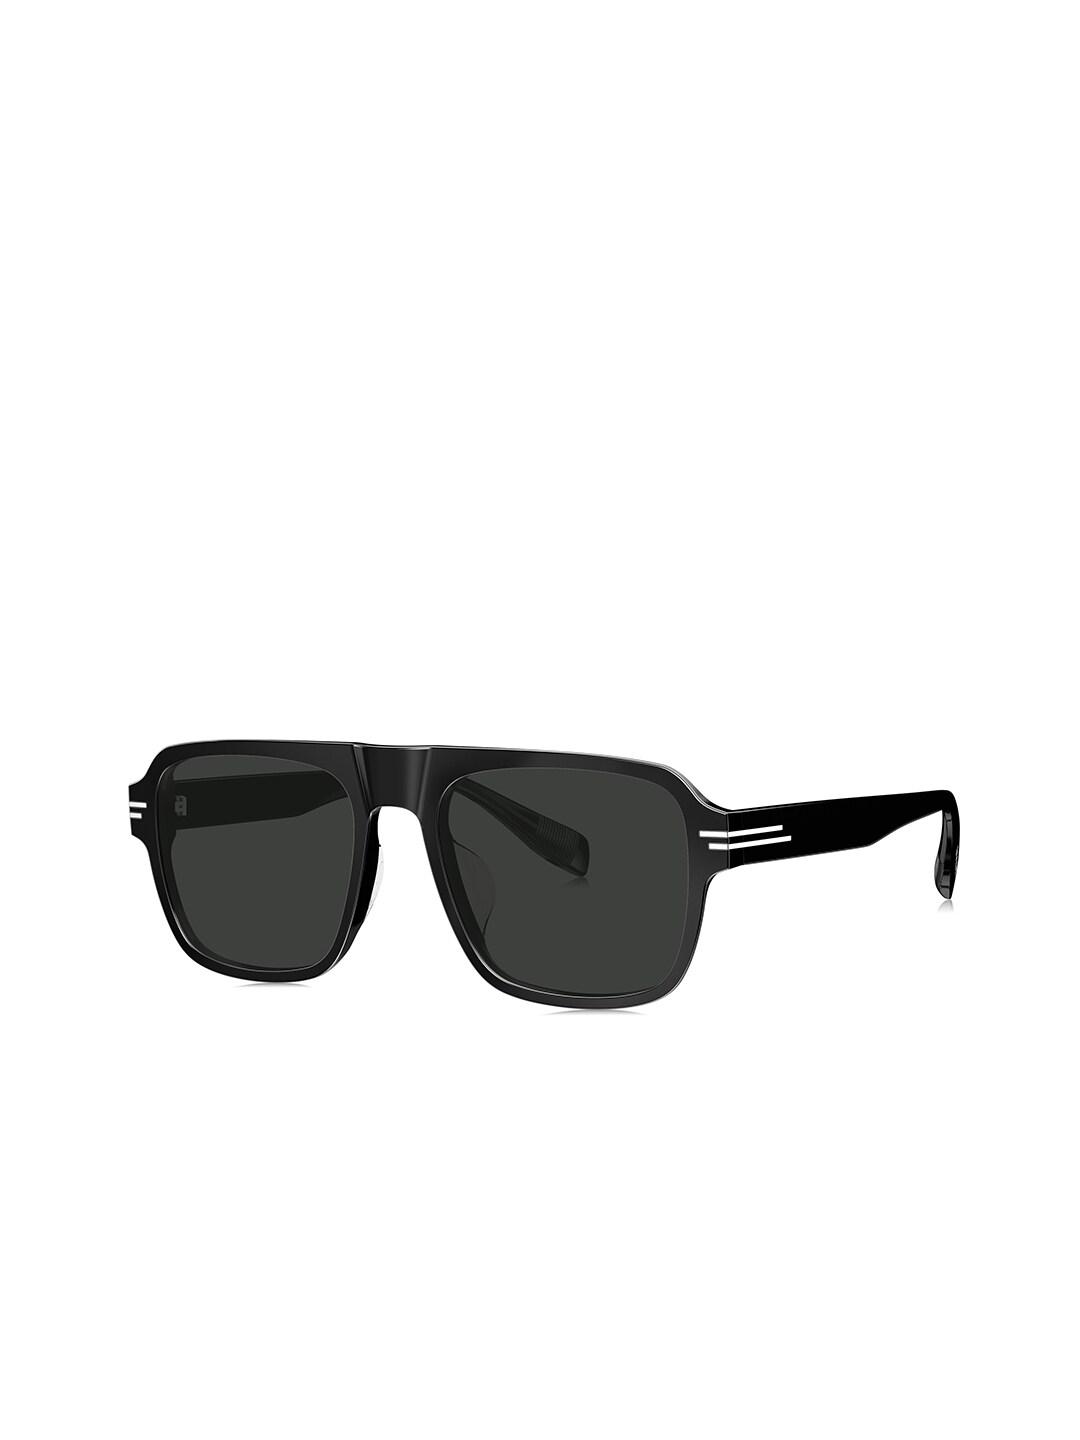 BOLON EYEWEAR Men Oval Sunglasses with Polarised and UV Protected Lens